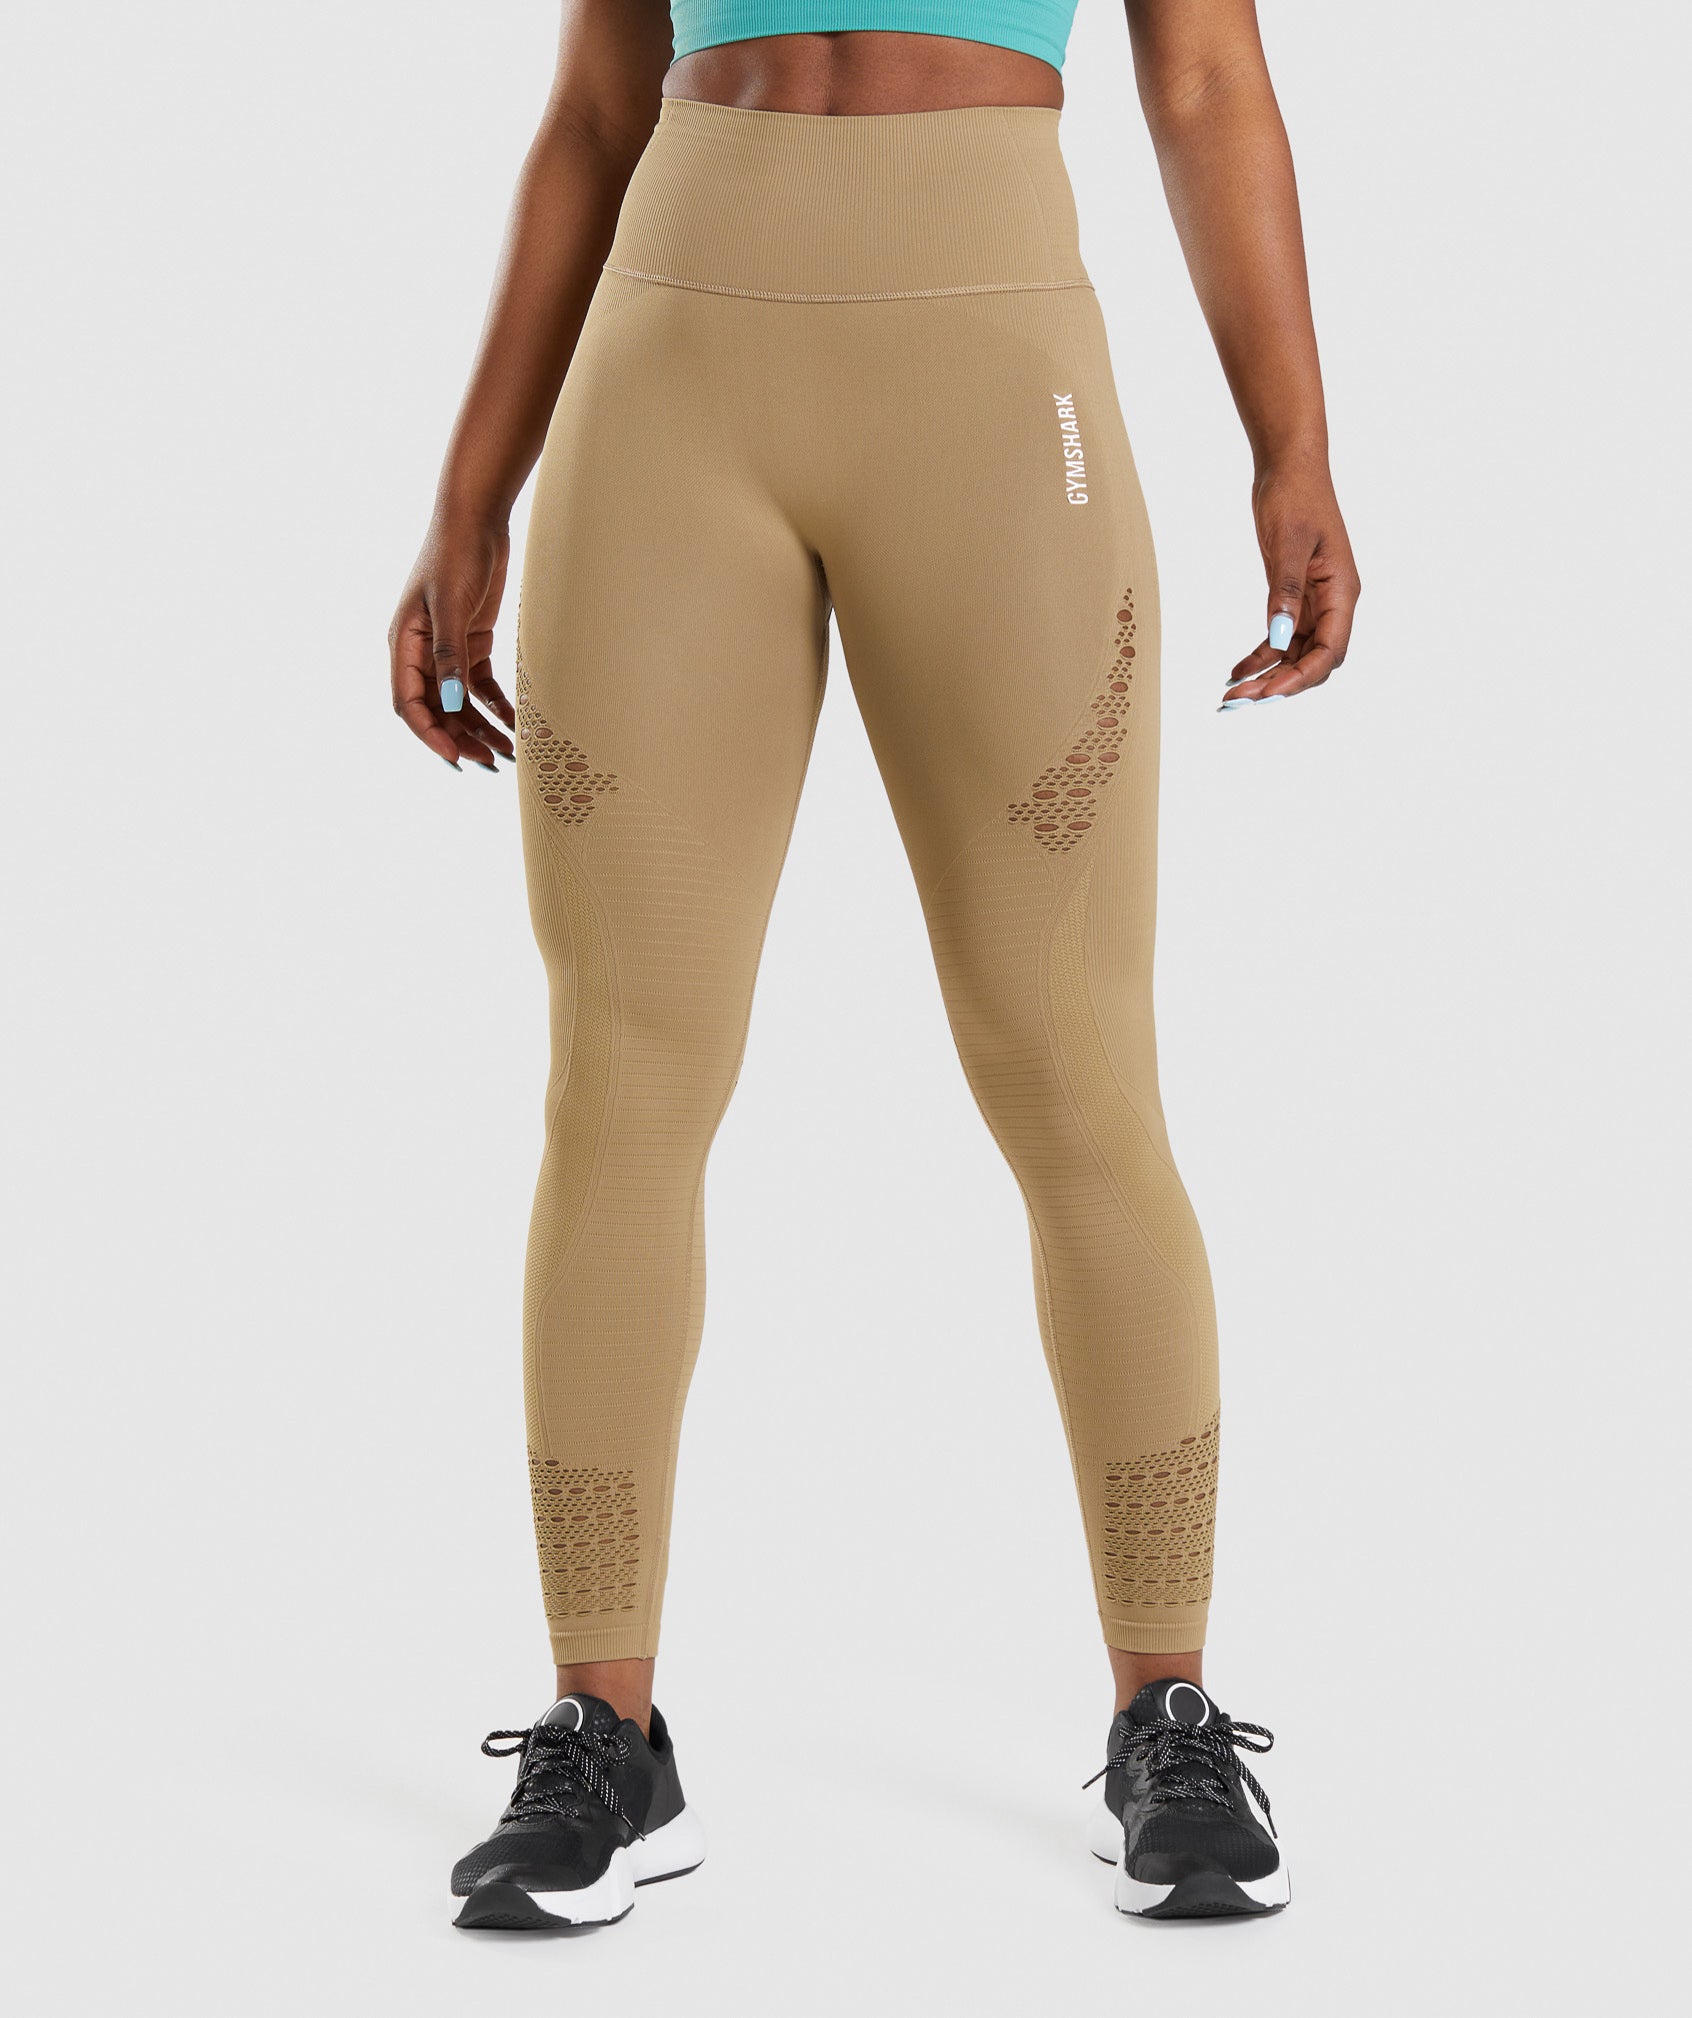 Energy Seamless Leggings in Biscotti Brown - view 1